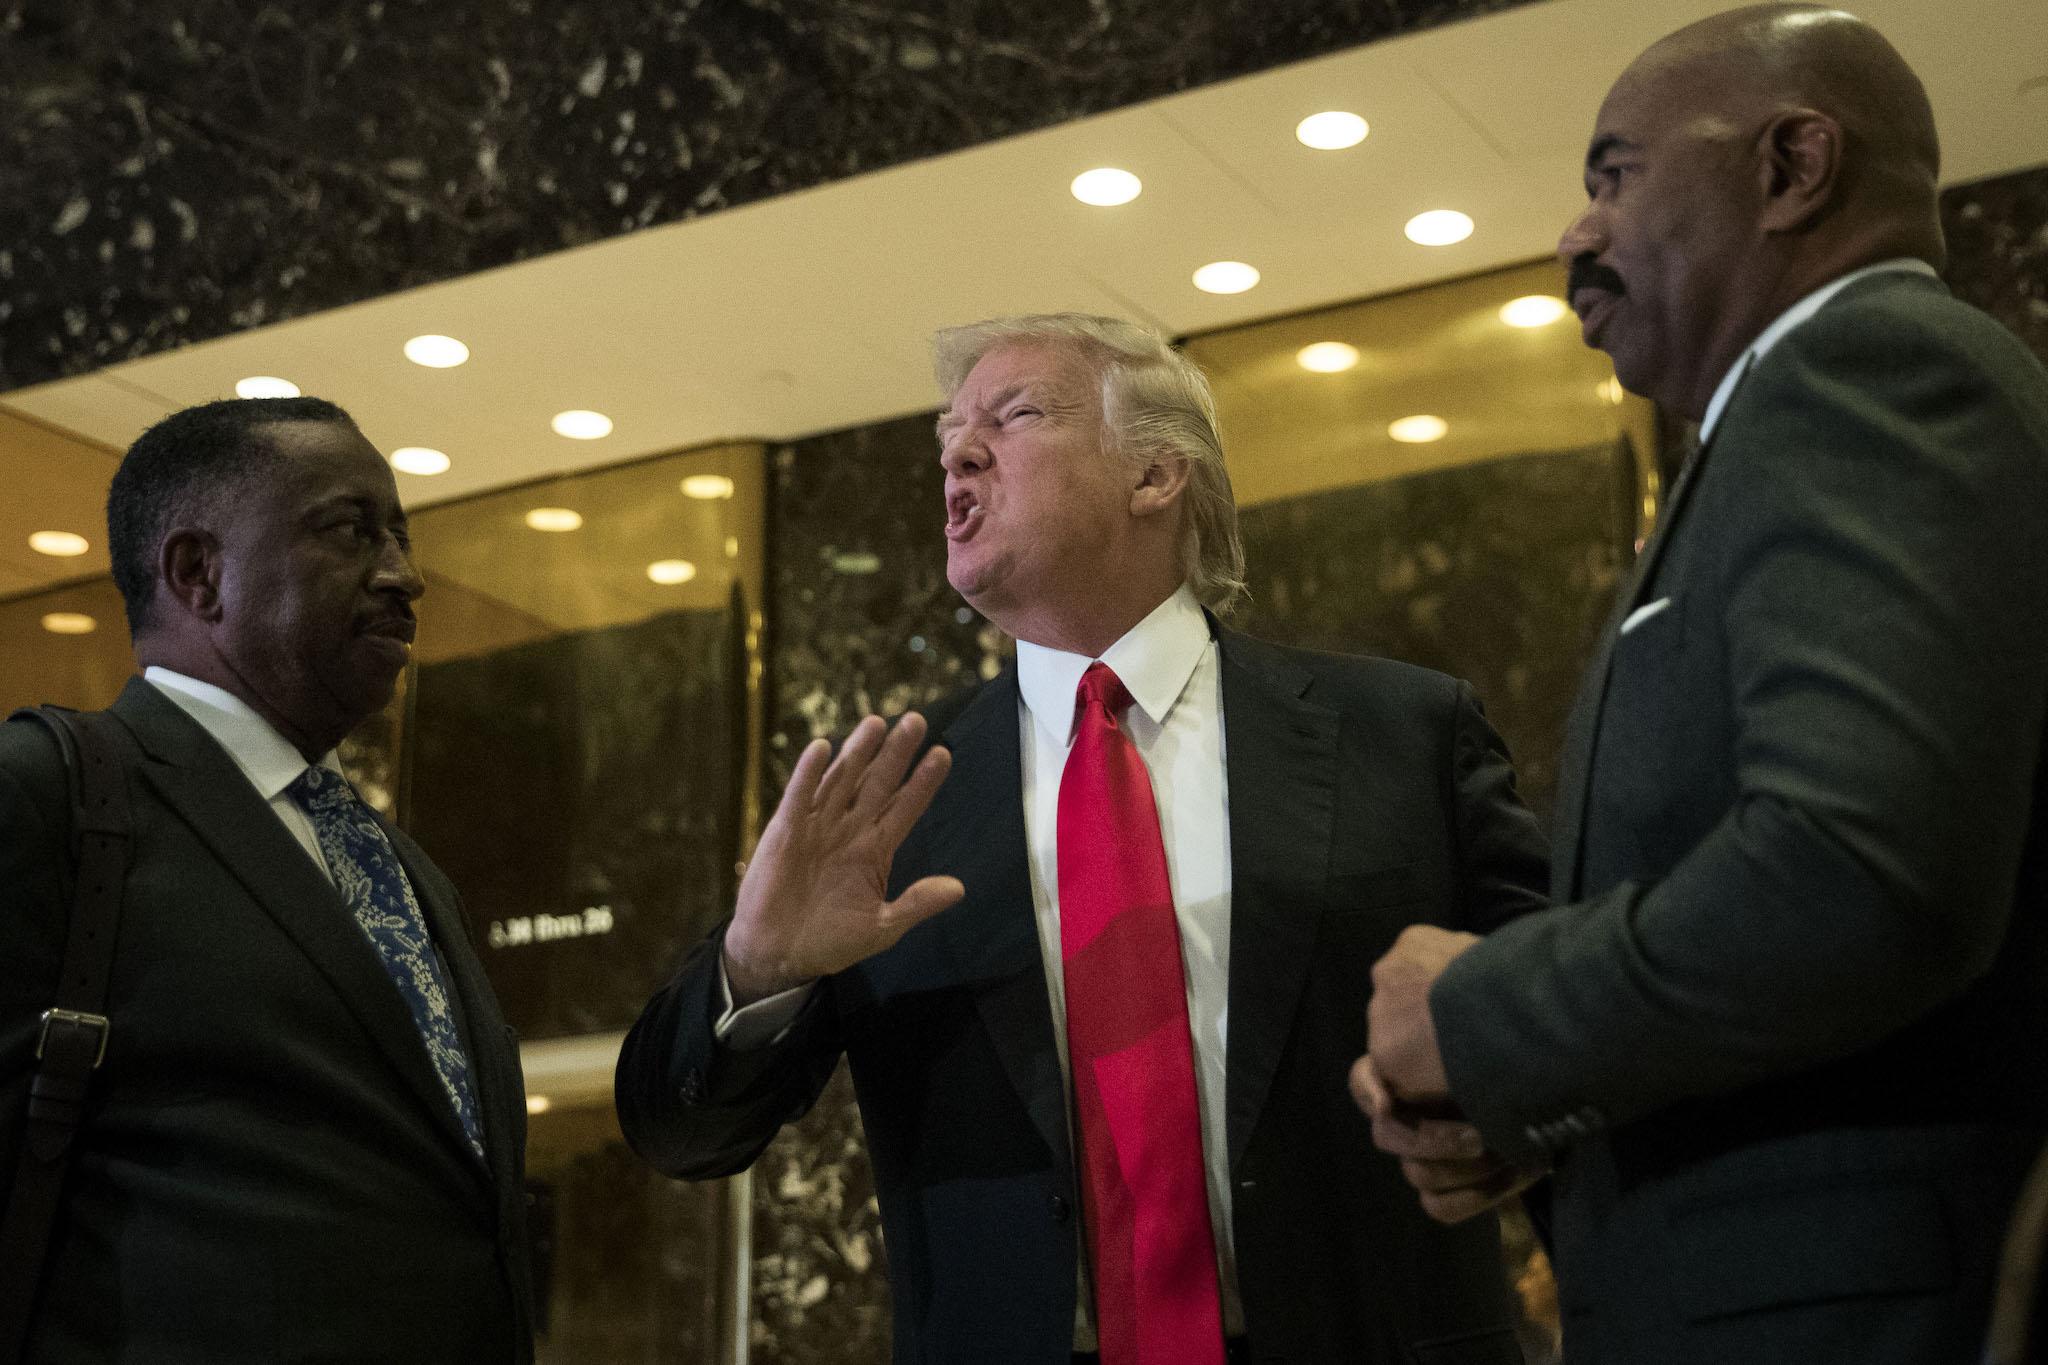 President-elect Donald Trump (C) and television personality Steve Harvey speak to reporters after their meeting at Trump Tower, January 13, 2017 in New York City. President-elect Trump continues to hold meetings at Trump Tower in New York